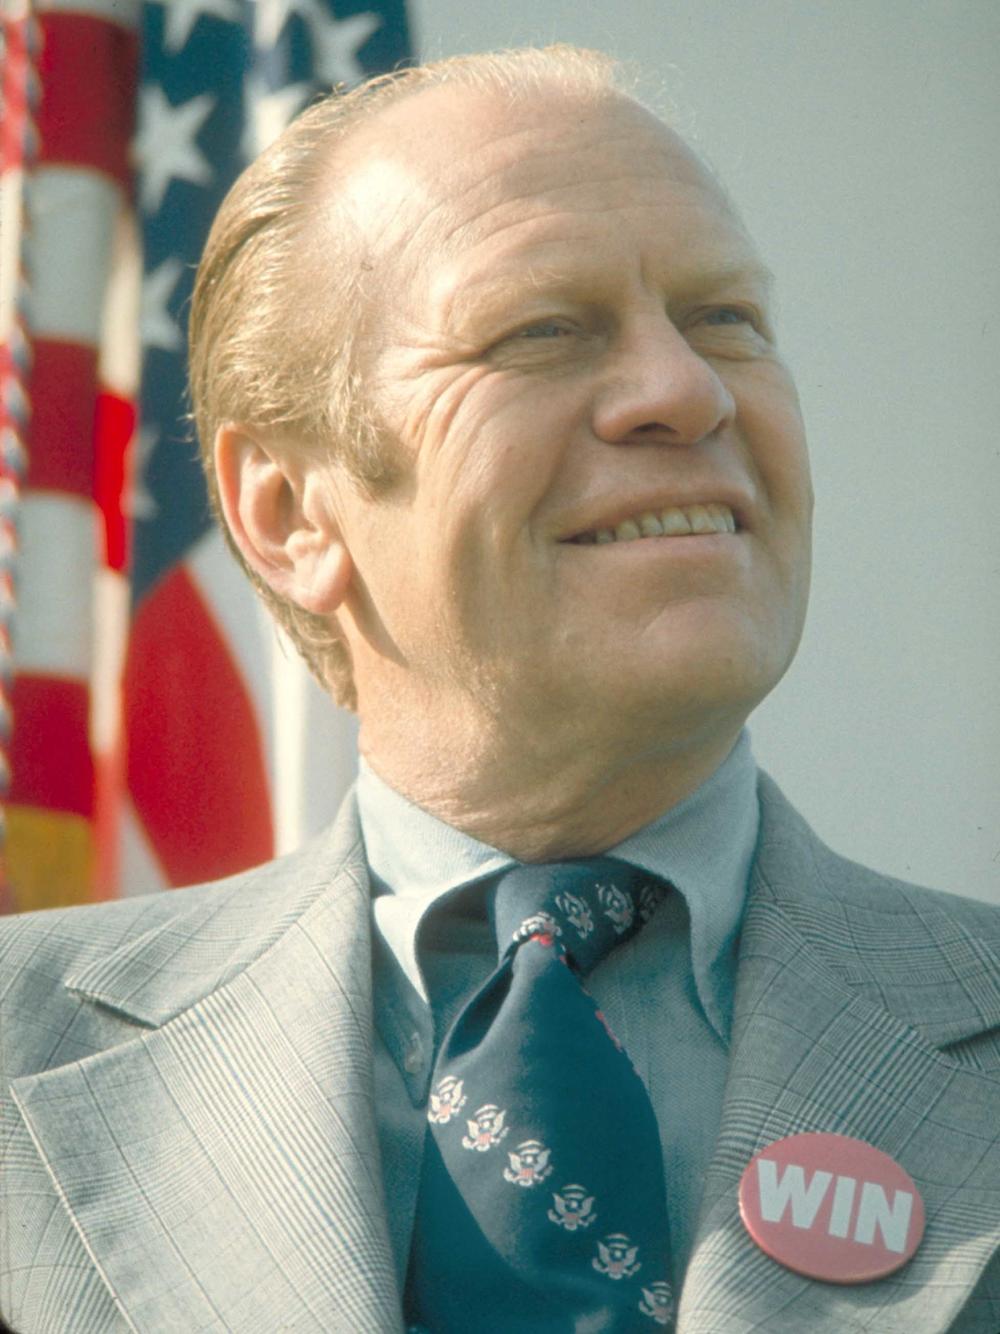 President Gerald Ford wearing a WIN (Whip Inflation Now) button on his lapel in 1974.